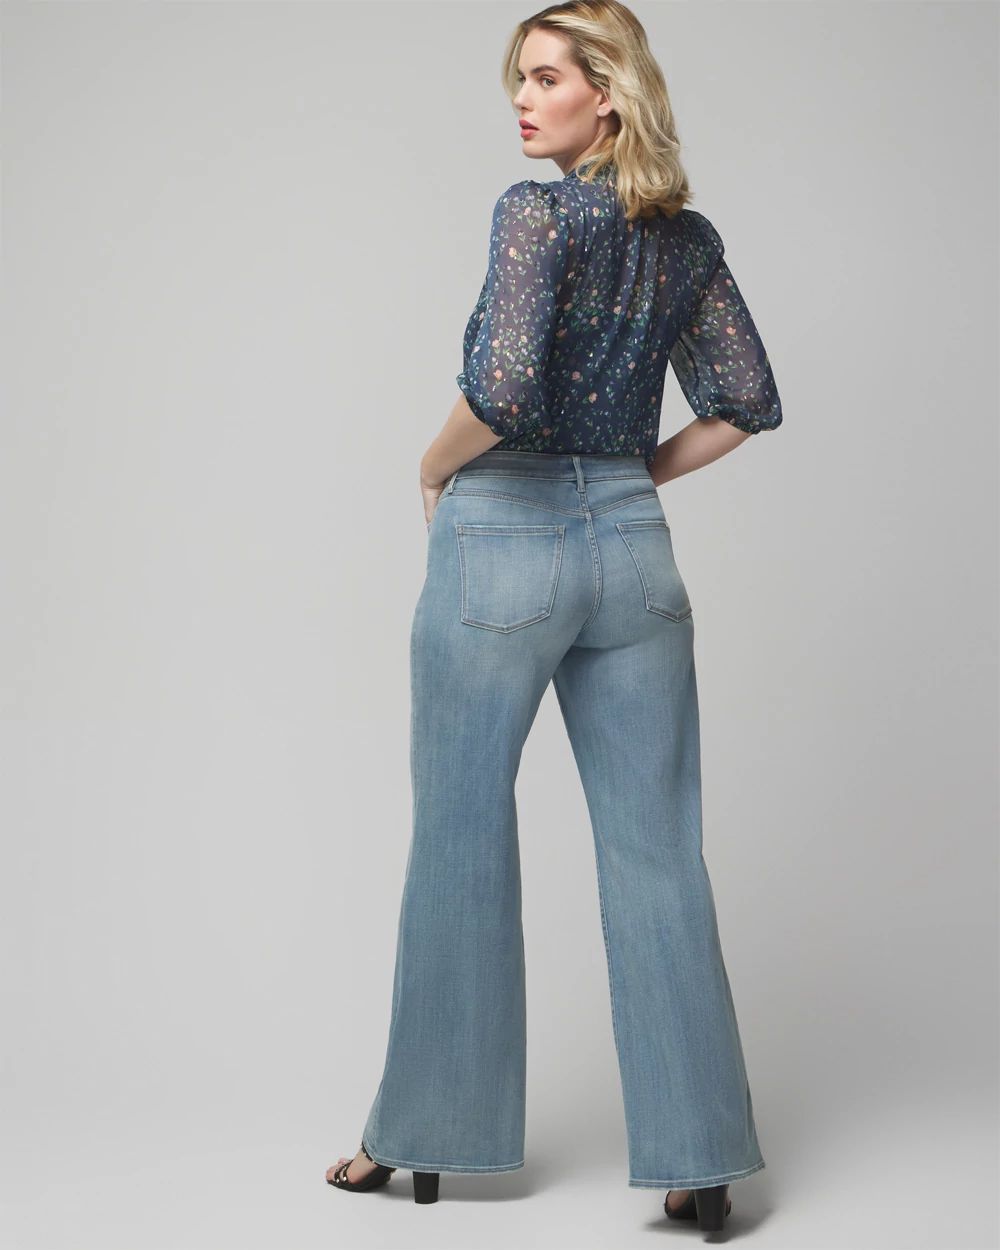 Curvy High-Rise Everyday Soft Denim  Wide-Leg Jeans click to view larger image.